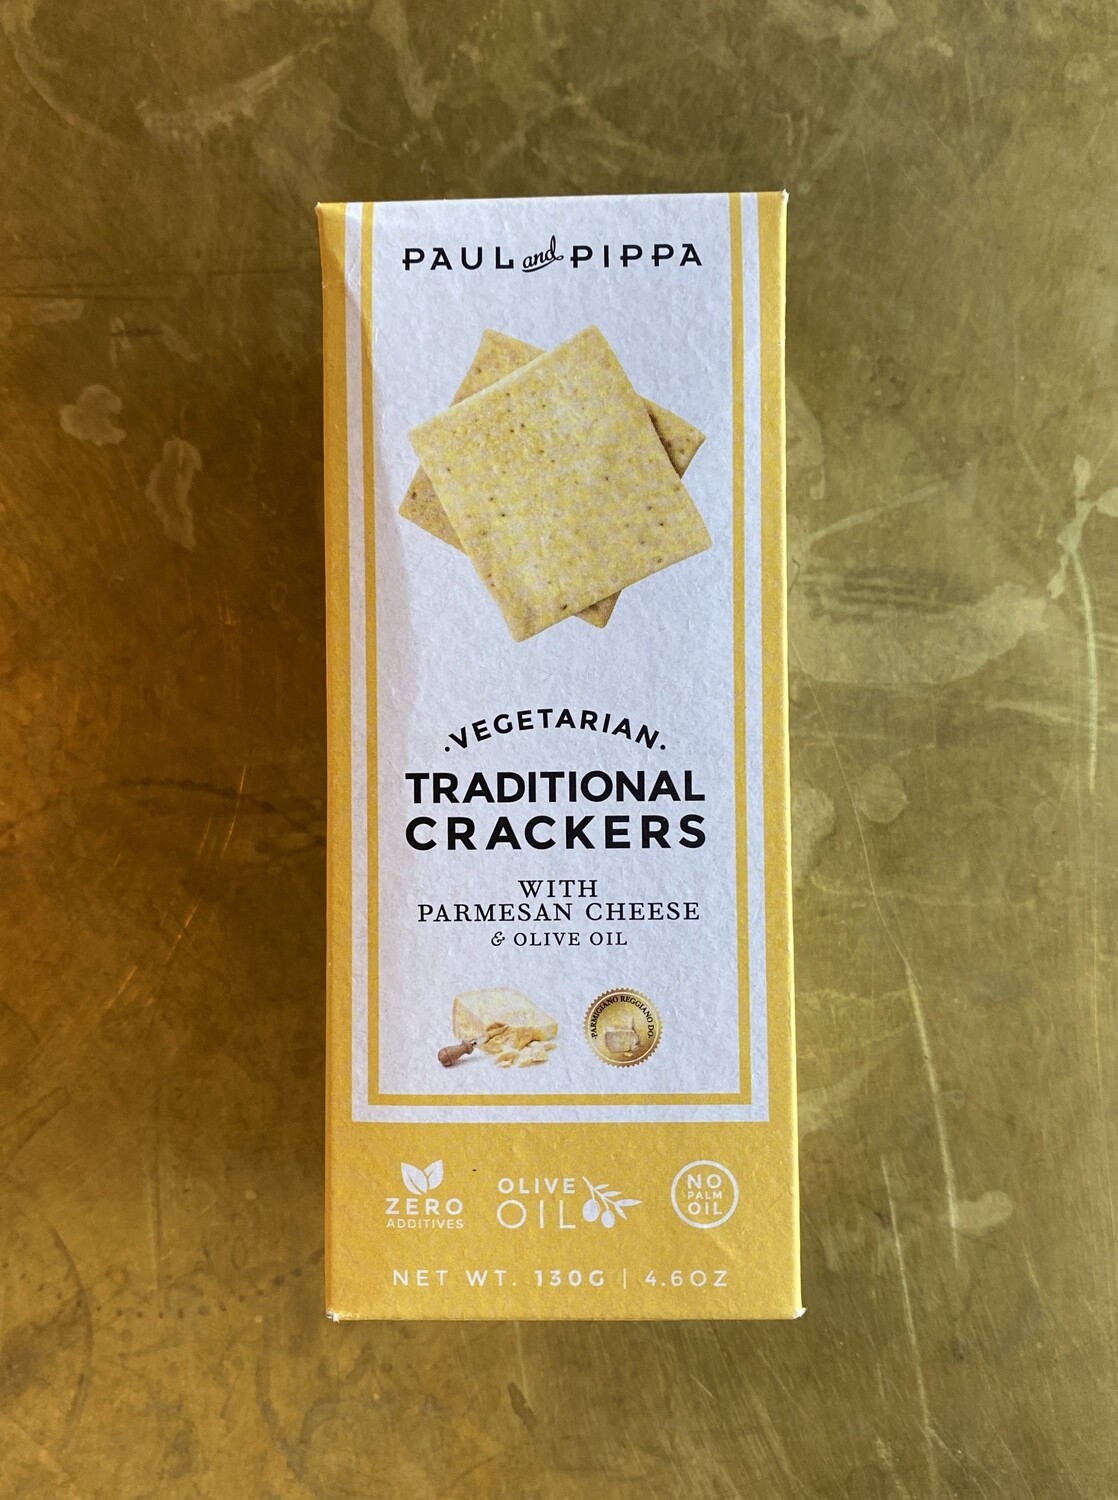 Paul and Pippa Parmesan Crackers